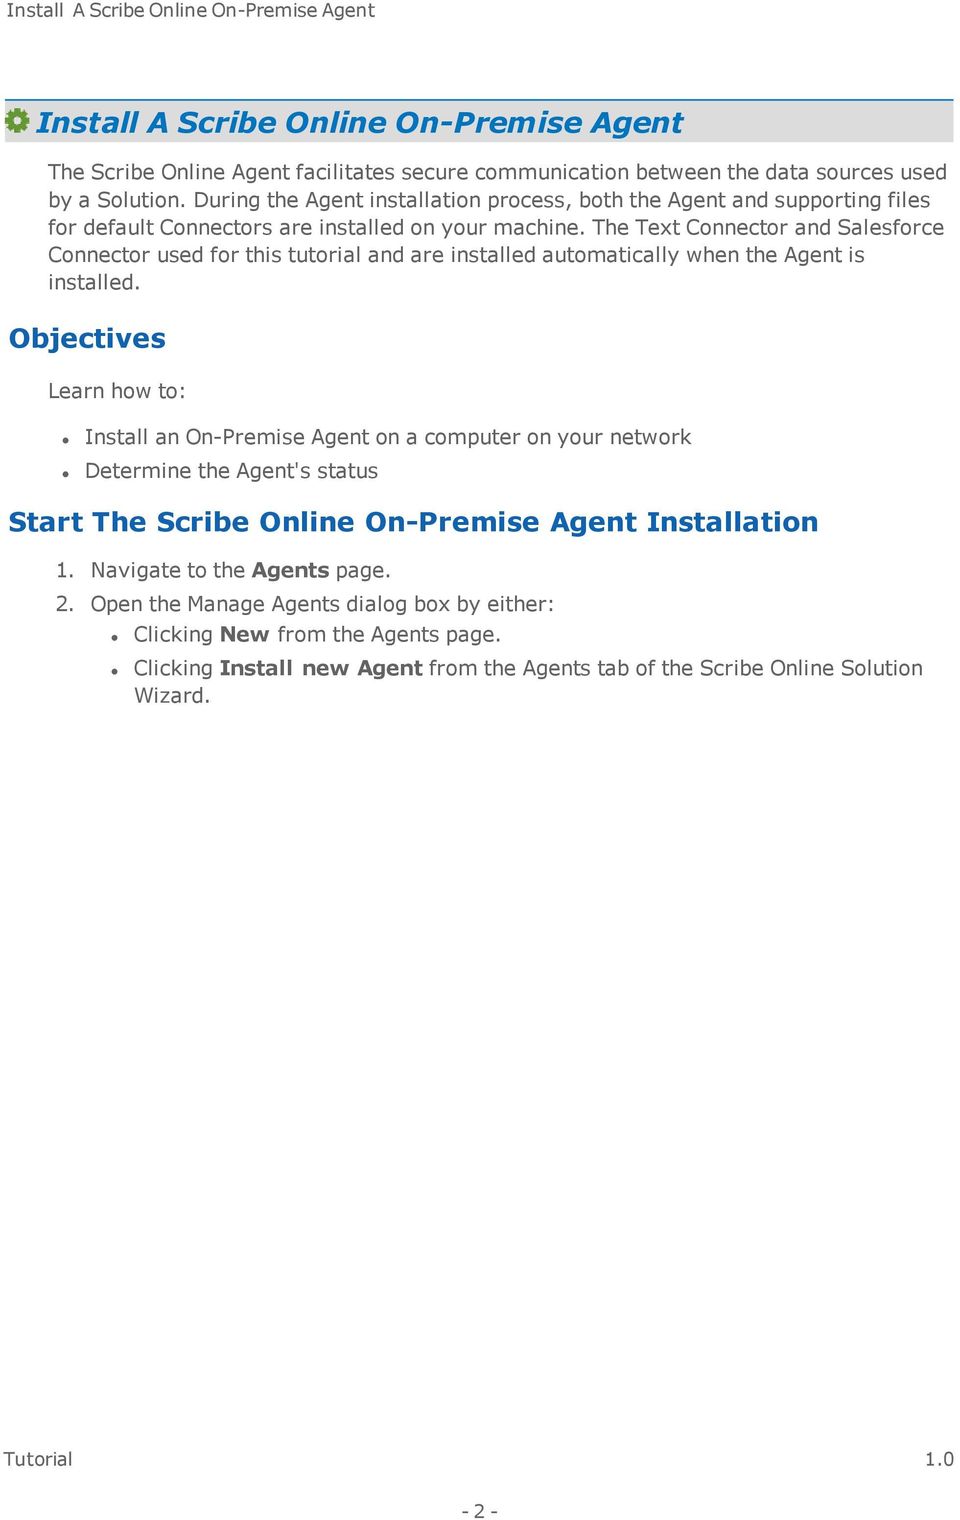 The Text Connector and Salesforce Connector used for this tutorial and are installed automatically when the Agent is installed.